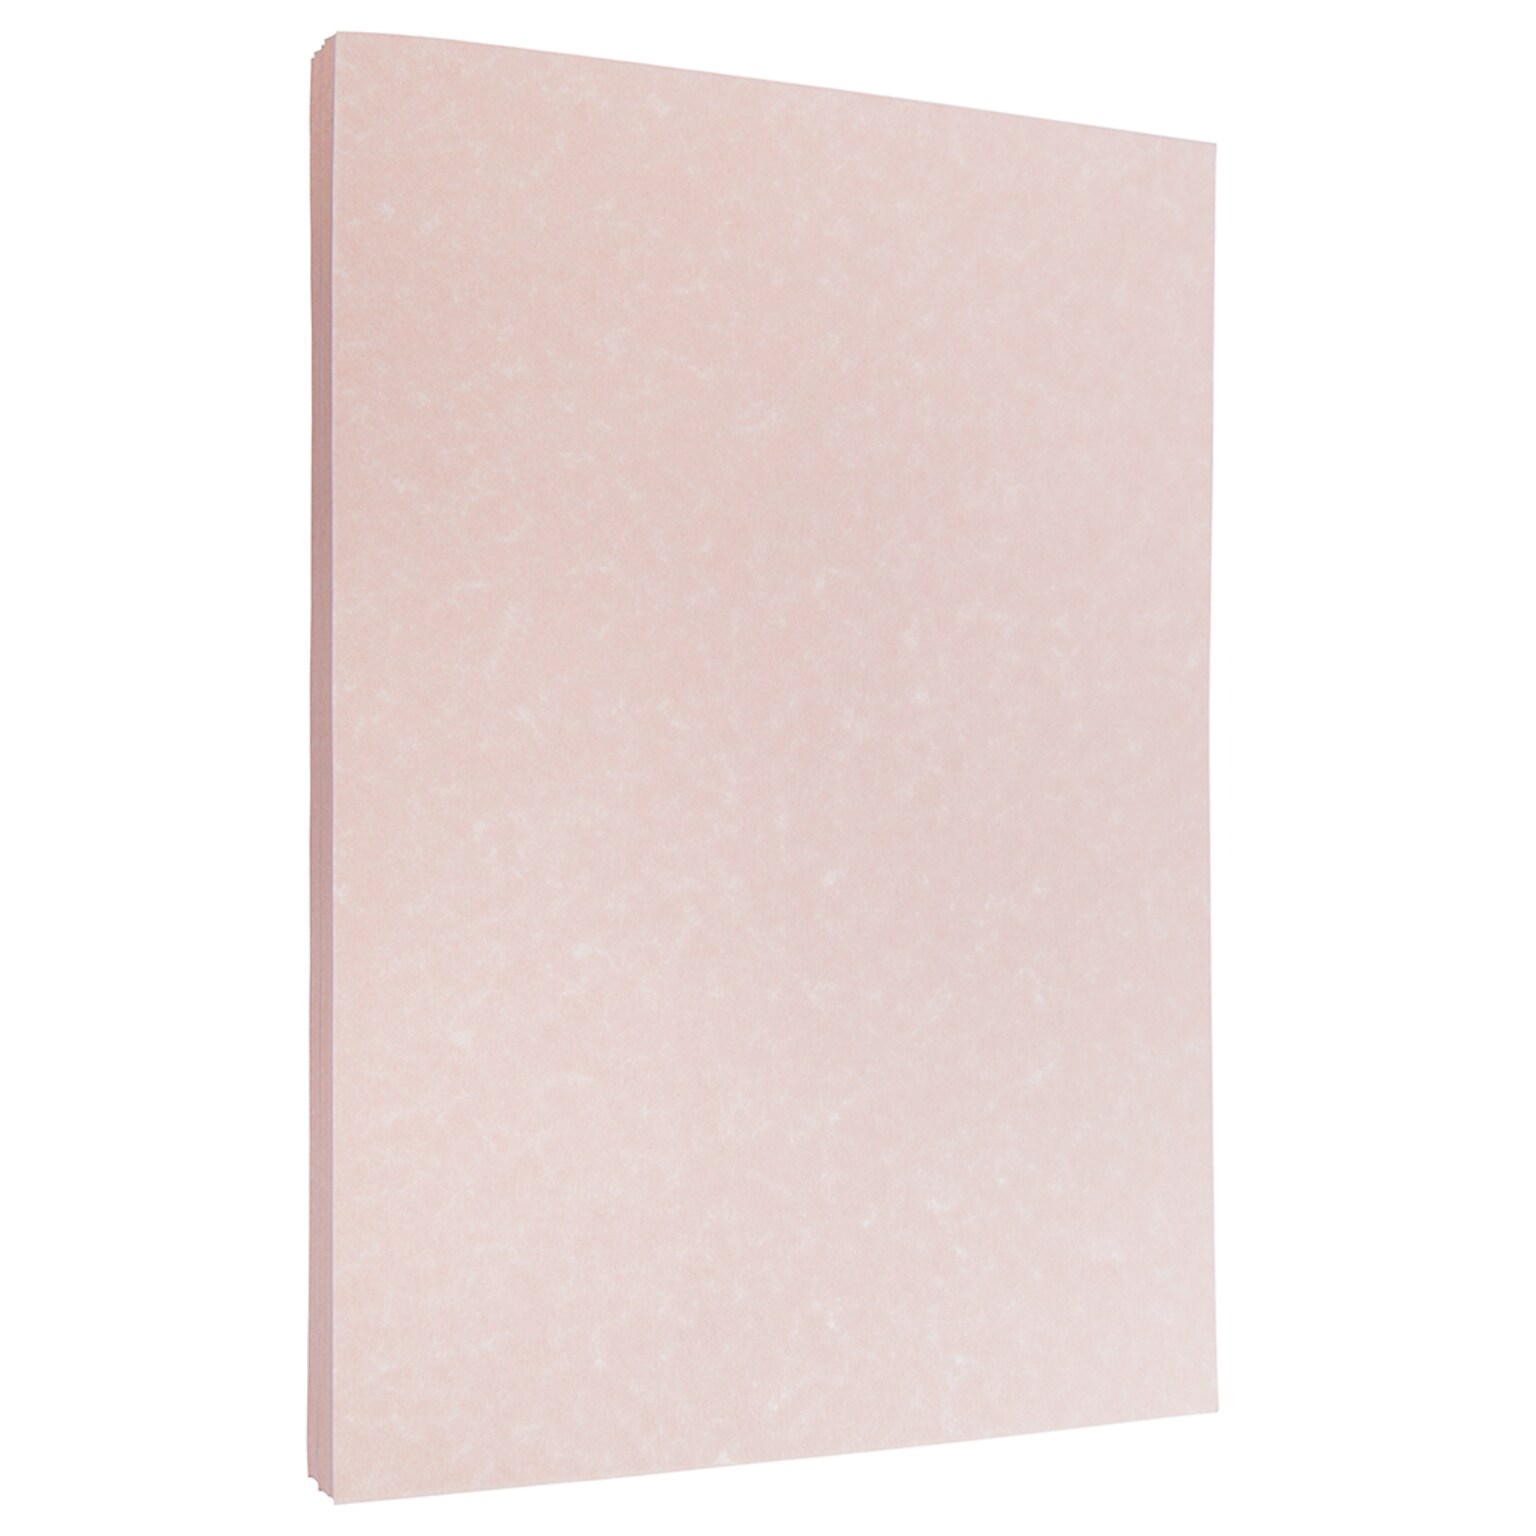 JAM Paper 8.5 x 11 Color Writing Paper, 24 lbs., Salmon Pink, 50 Sheets/Ream (17137622A)